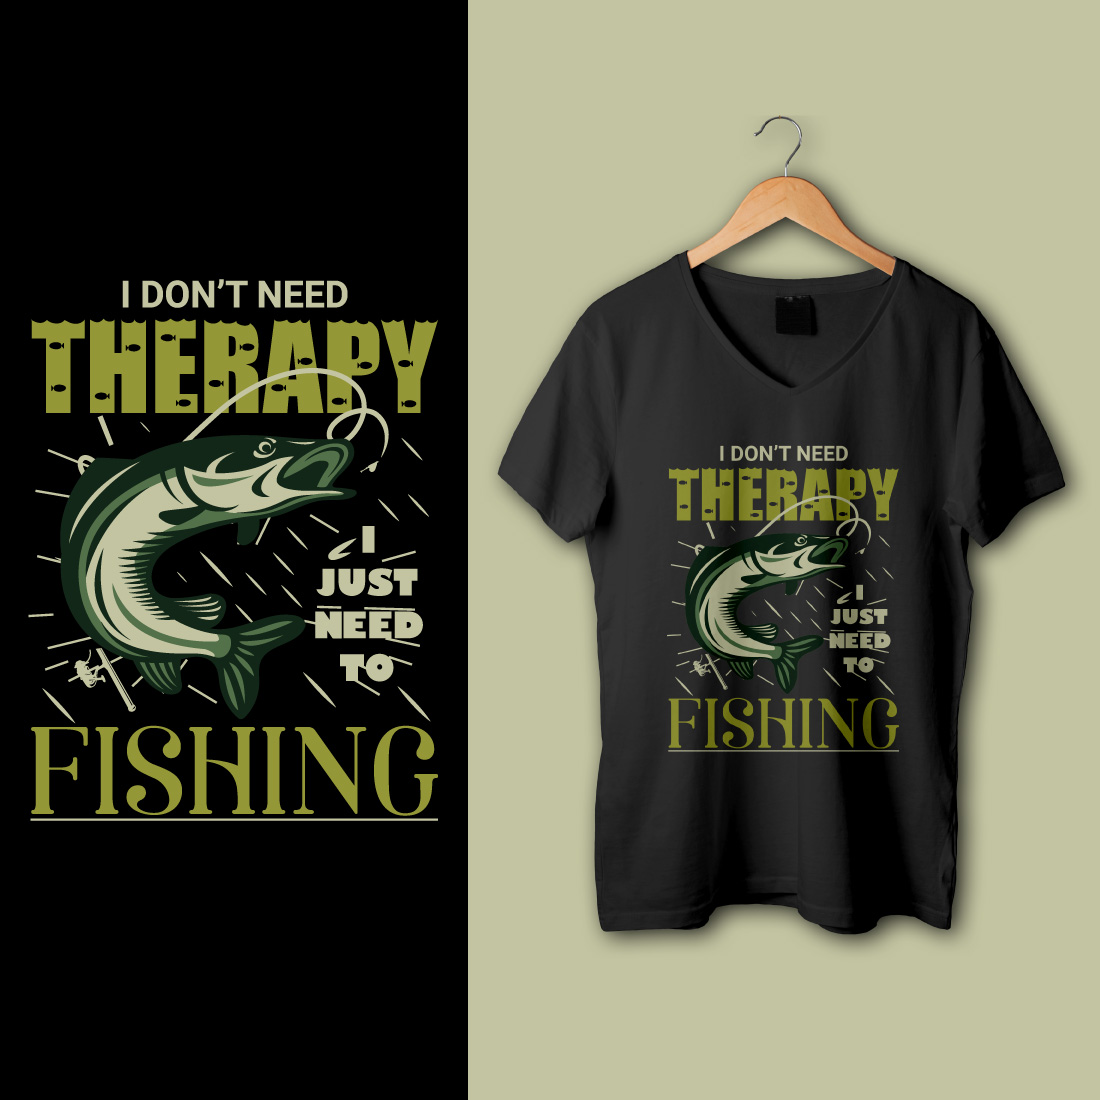 Fishing t-shirt design preview image.